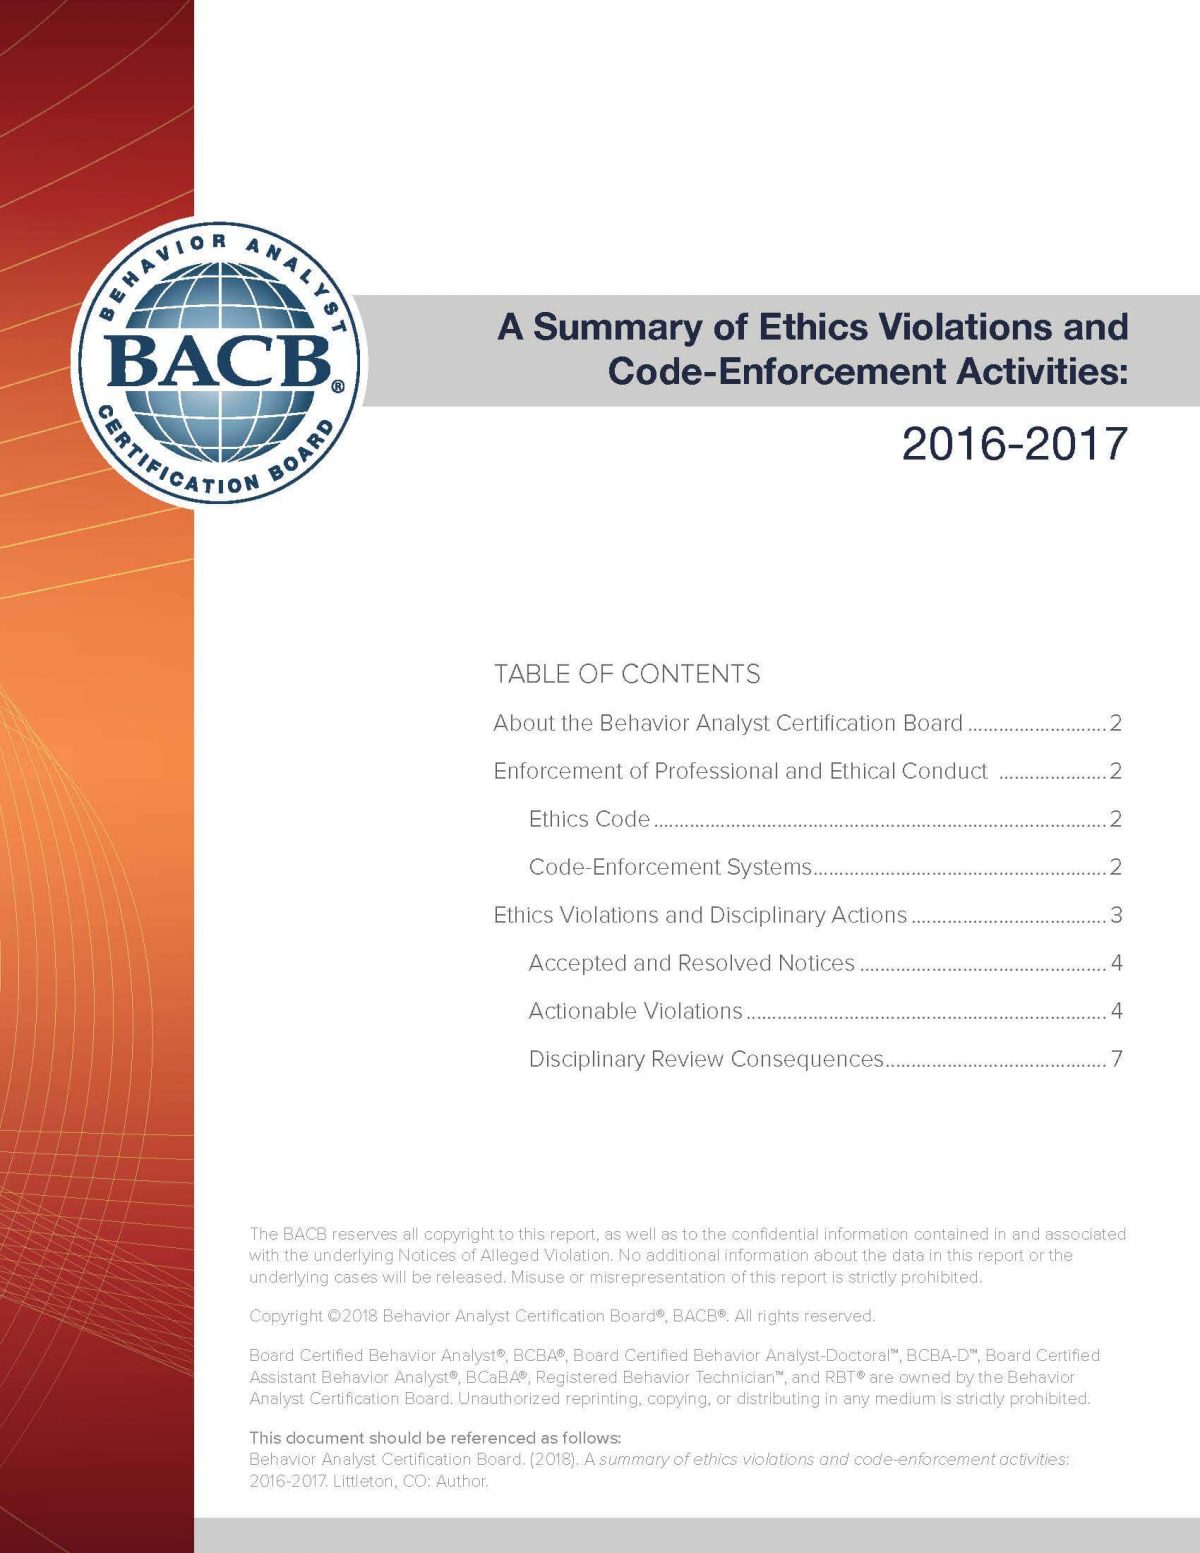 A Summary of Ethics Violations and Code-Enforcement Activities: 2016-2017